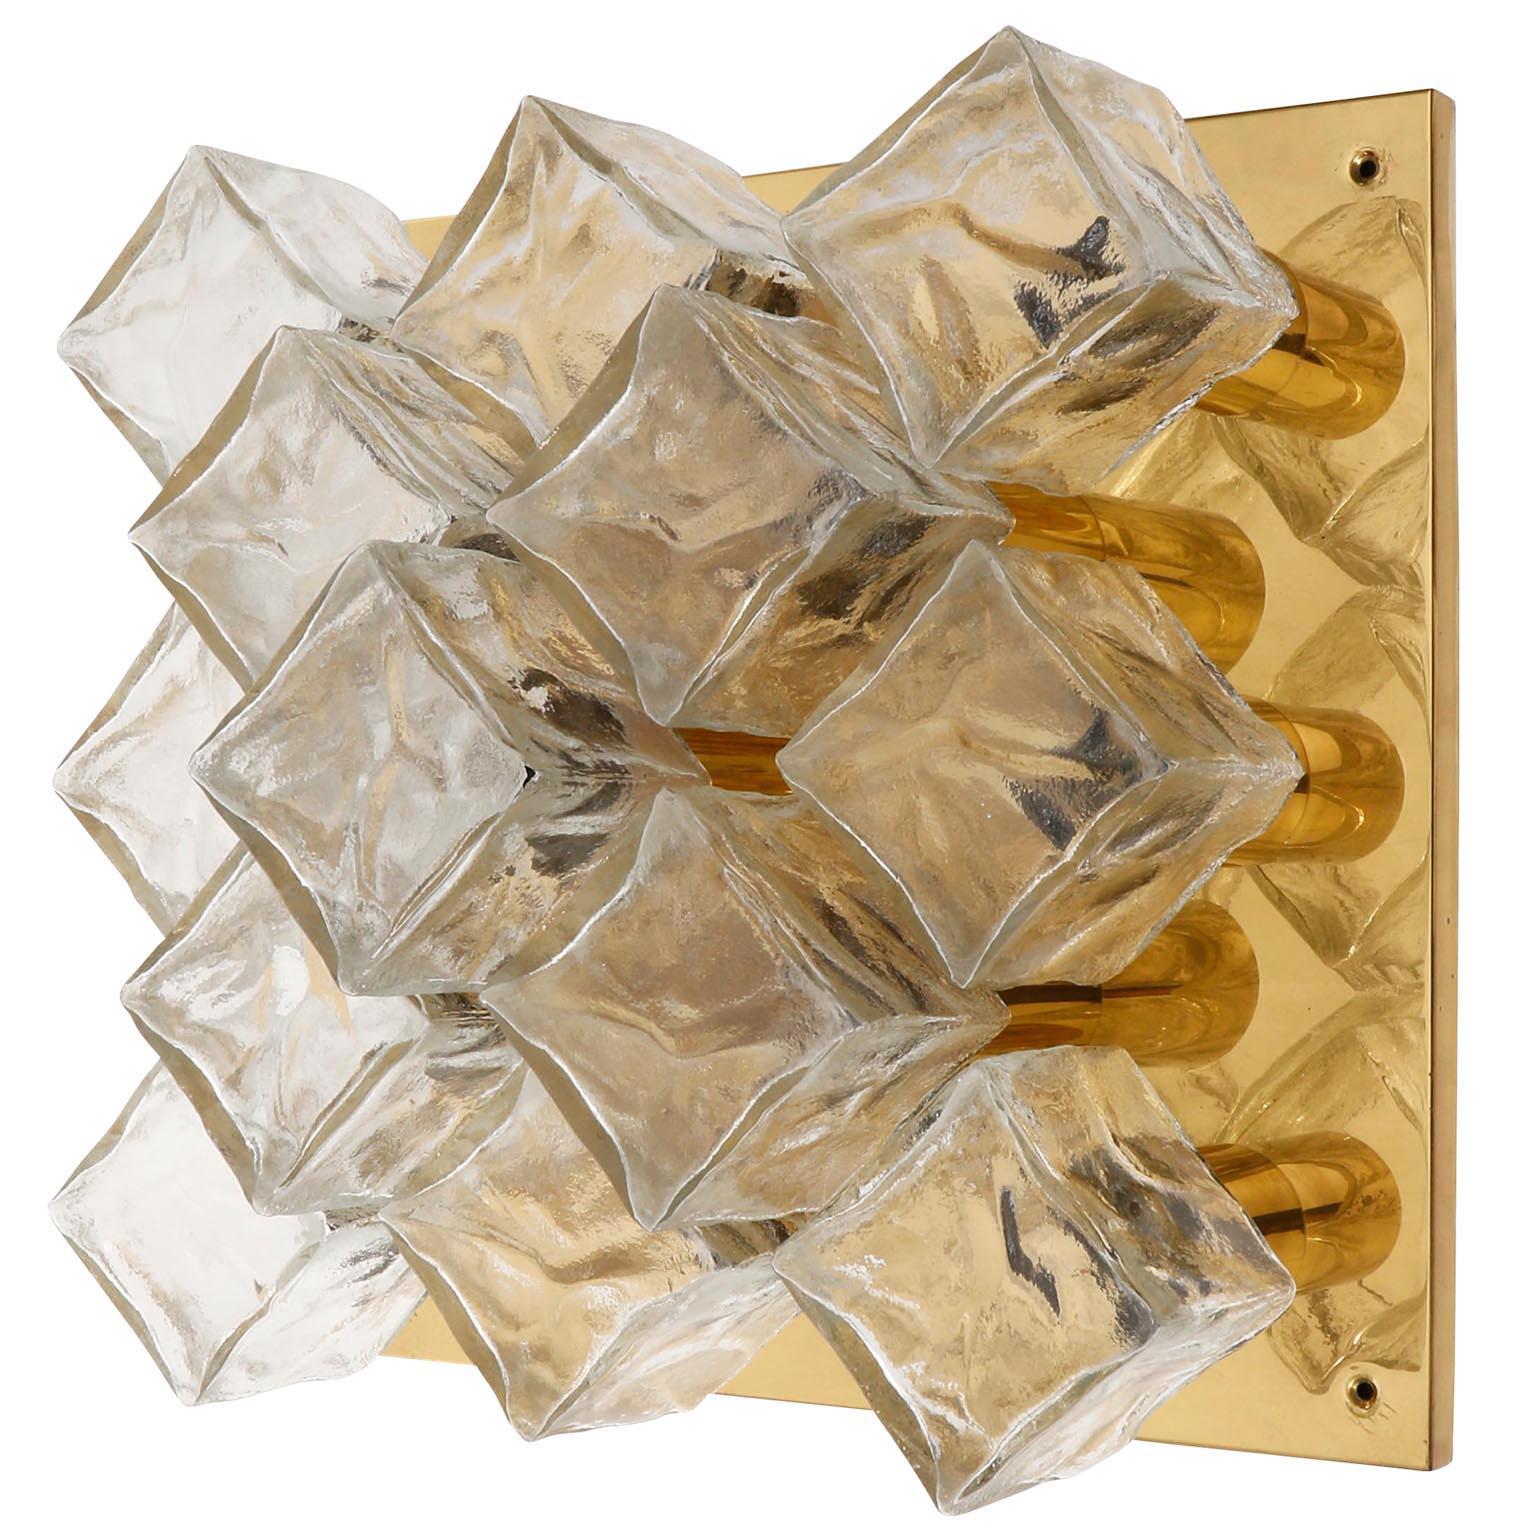 A pair of identical, large and square light fixtures model 'Cubus' (German 'Würfel') by Kalmar, Austria, manufactured in midcentury, circa 1970 (end of 1960s and beginning of 1970s).
Two pairs are available.
They are made of polished brass and